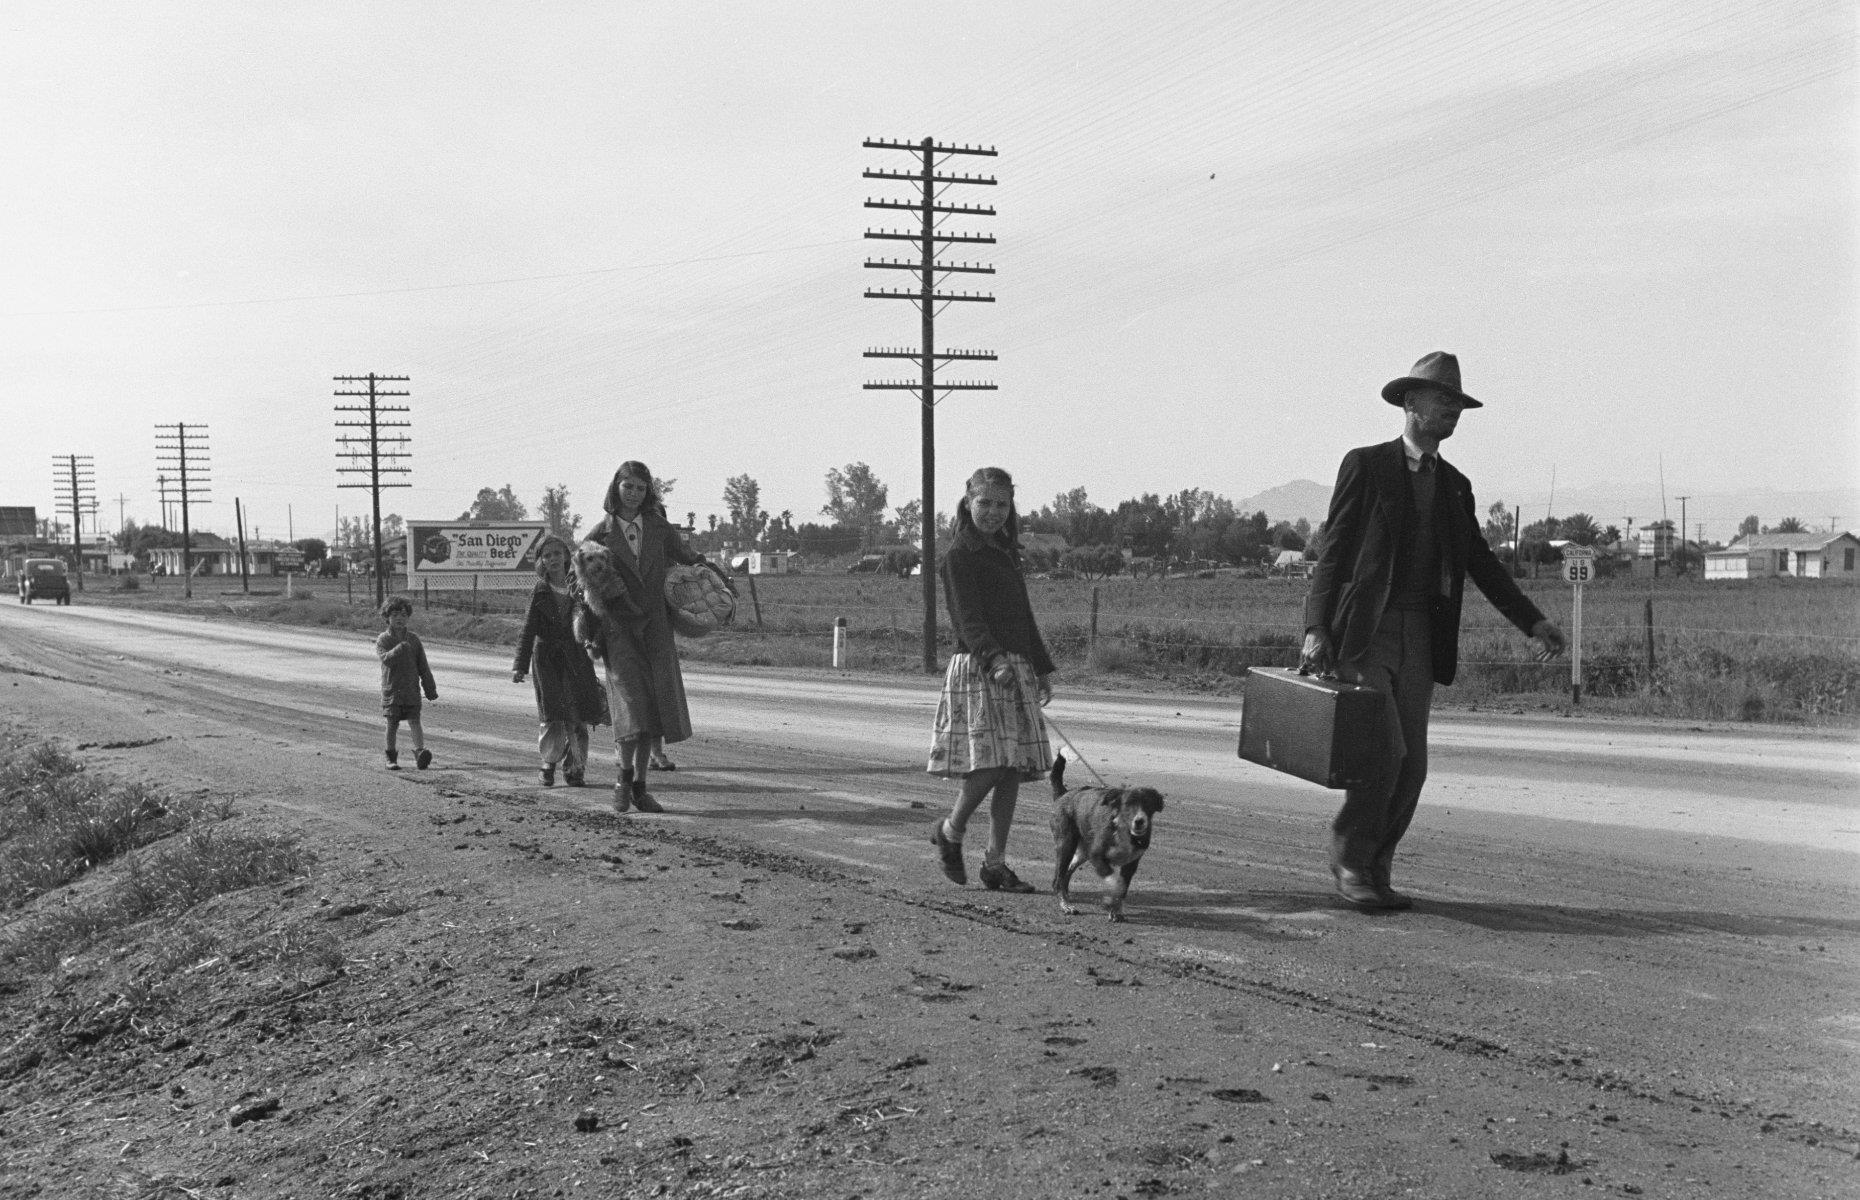 <p>Between 1935 and 1940, a quarter of a million Oklahomans traveled 1,300 miles to California, but they didn’t get a very warm welcome. Many settled in the San Joaquin Valley in search of agricultural work, but competition for jobs was intense and many ended up in tents and shantytowns.</p>  <p>'Okies' soon became a derogatory term for any poor migrants making their way to California, like this family of cotton pickers walking by the side of a highway from Phoenix, Arizona to San Diego.</p>